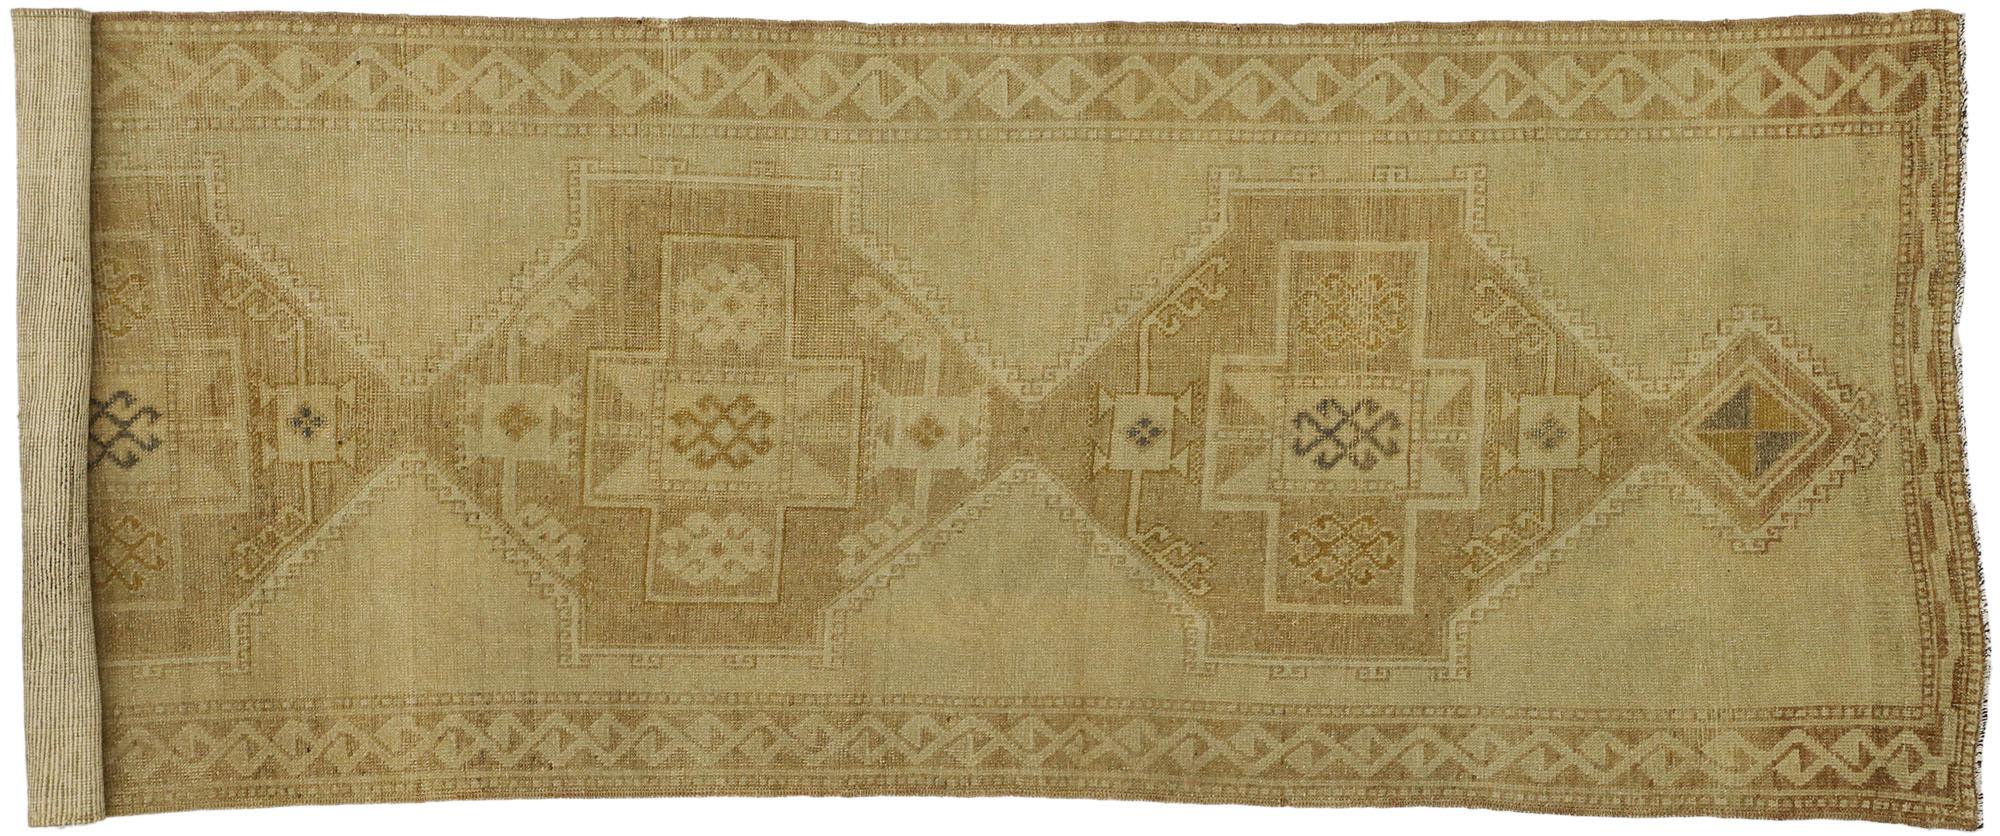 This subtle vintage Turkish Oushak carpet runner bears a remarkable air of chic sophistication with its modern style and muted colors. A beautiful display of elegant medallions delicately weaved as if they are floating in the light brown field. The